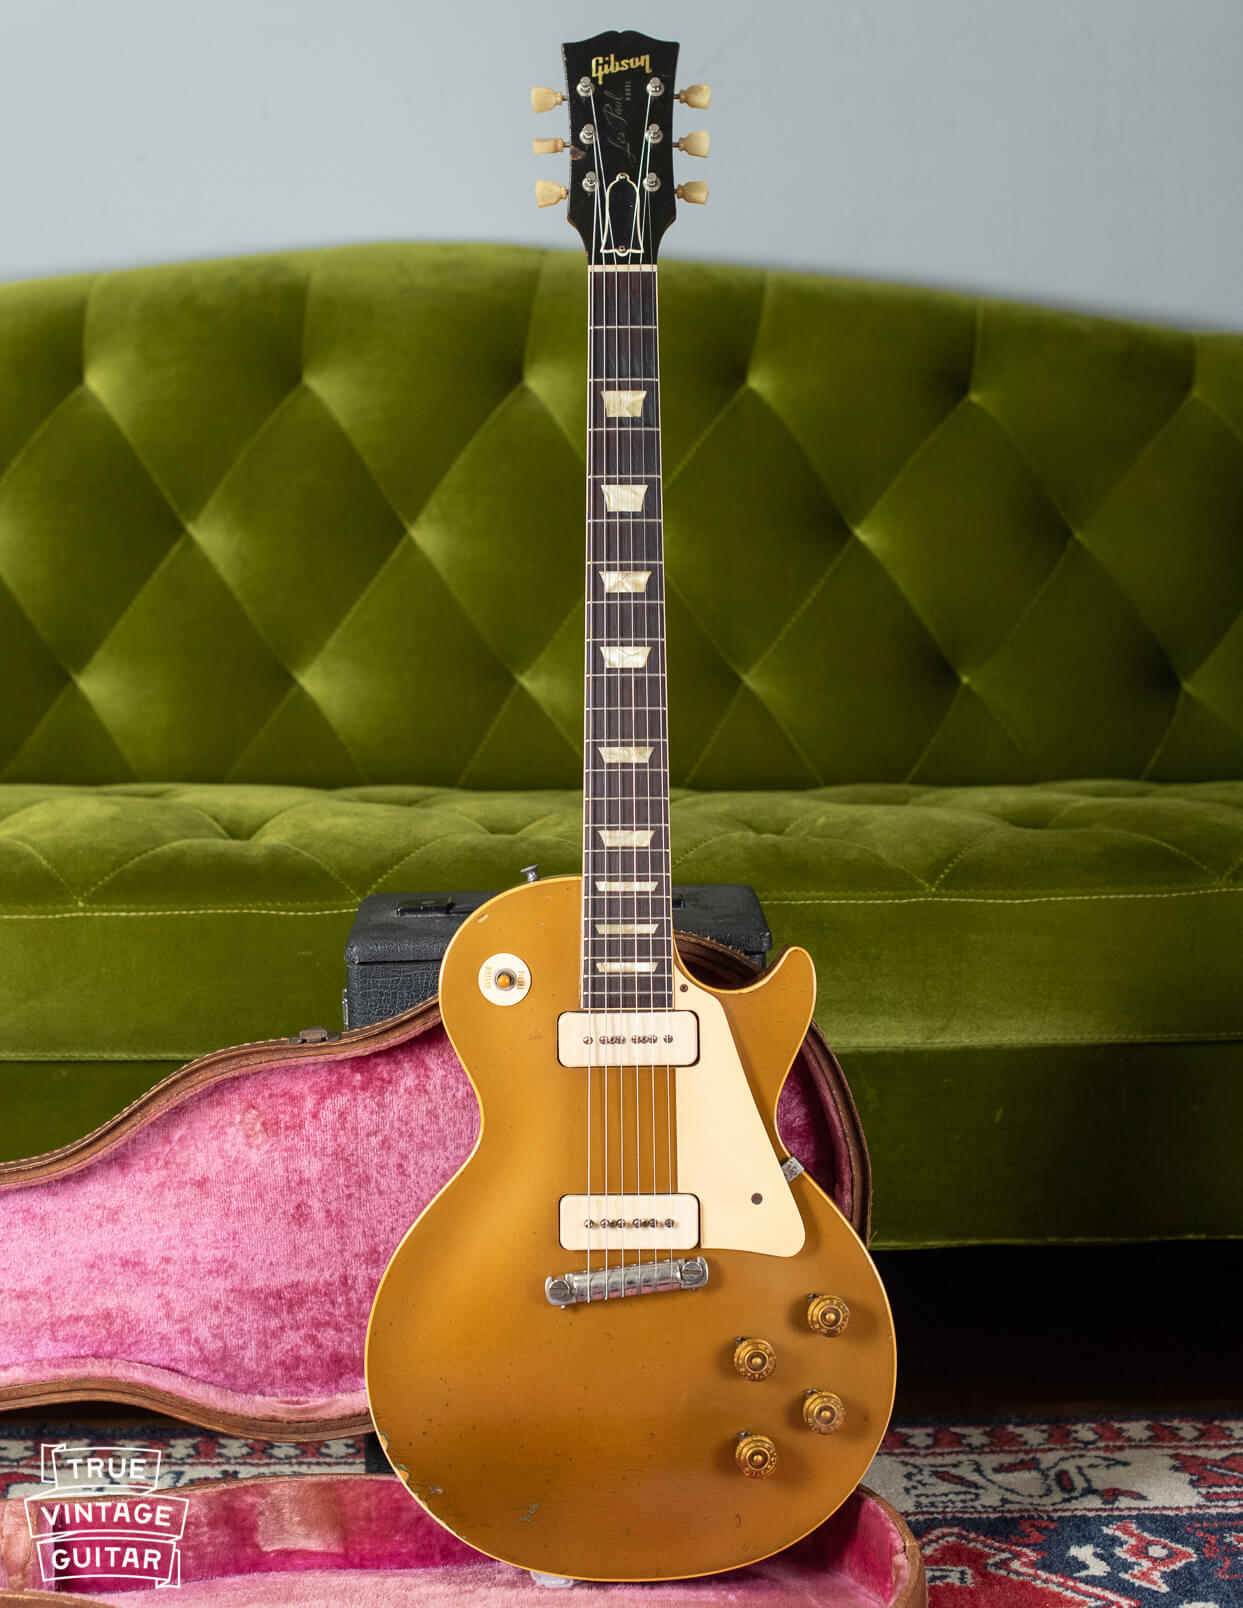 Gibson guitar collector buys 1950s Gibson Les Paul guitars in person